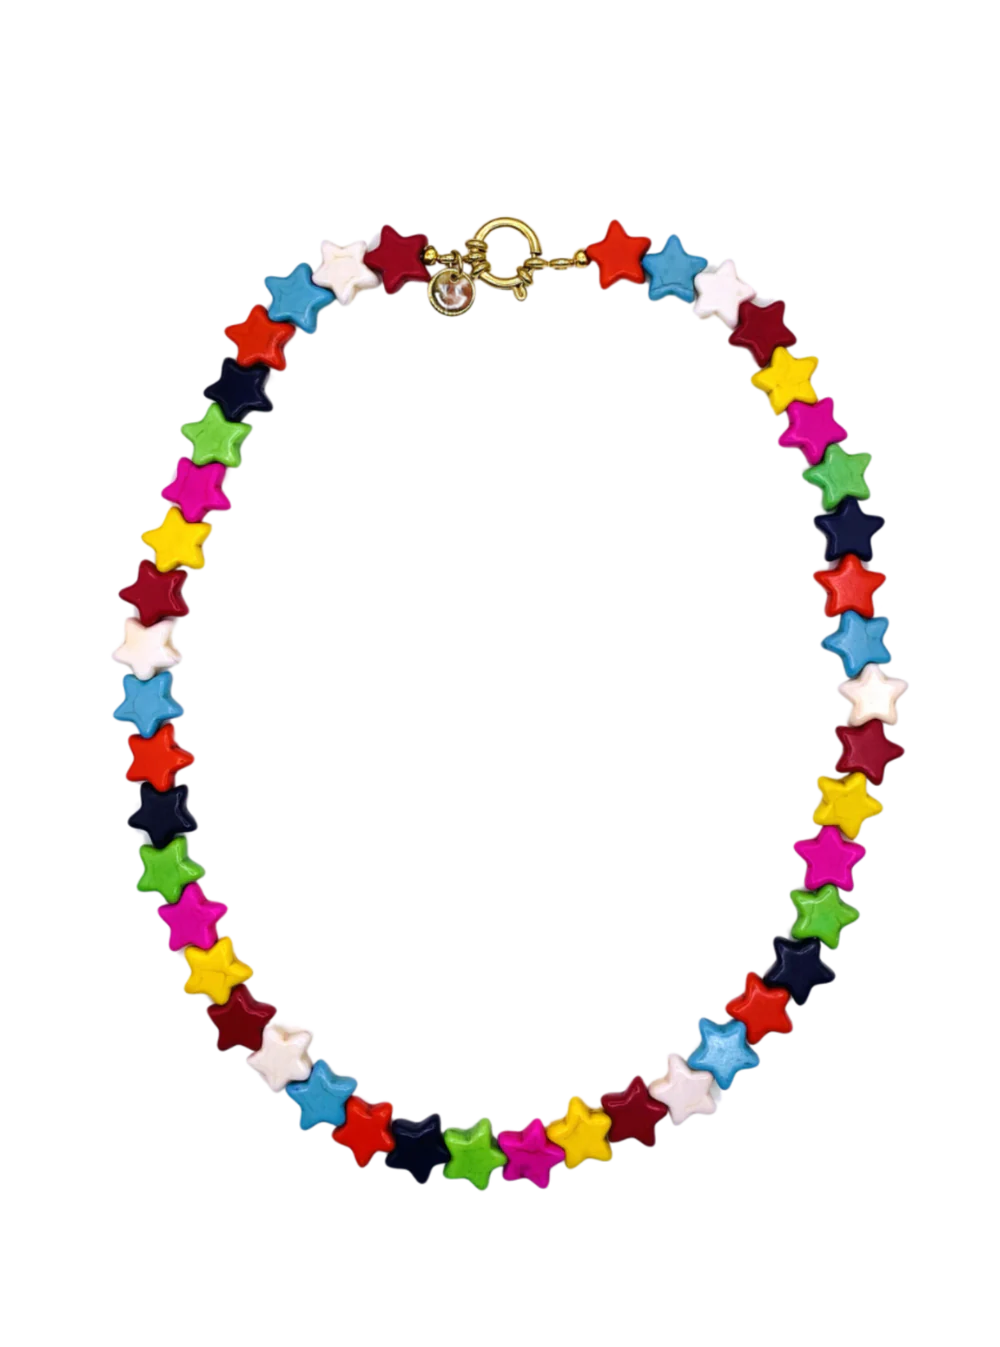 STAR MIXED NECKLACE